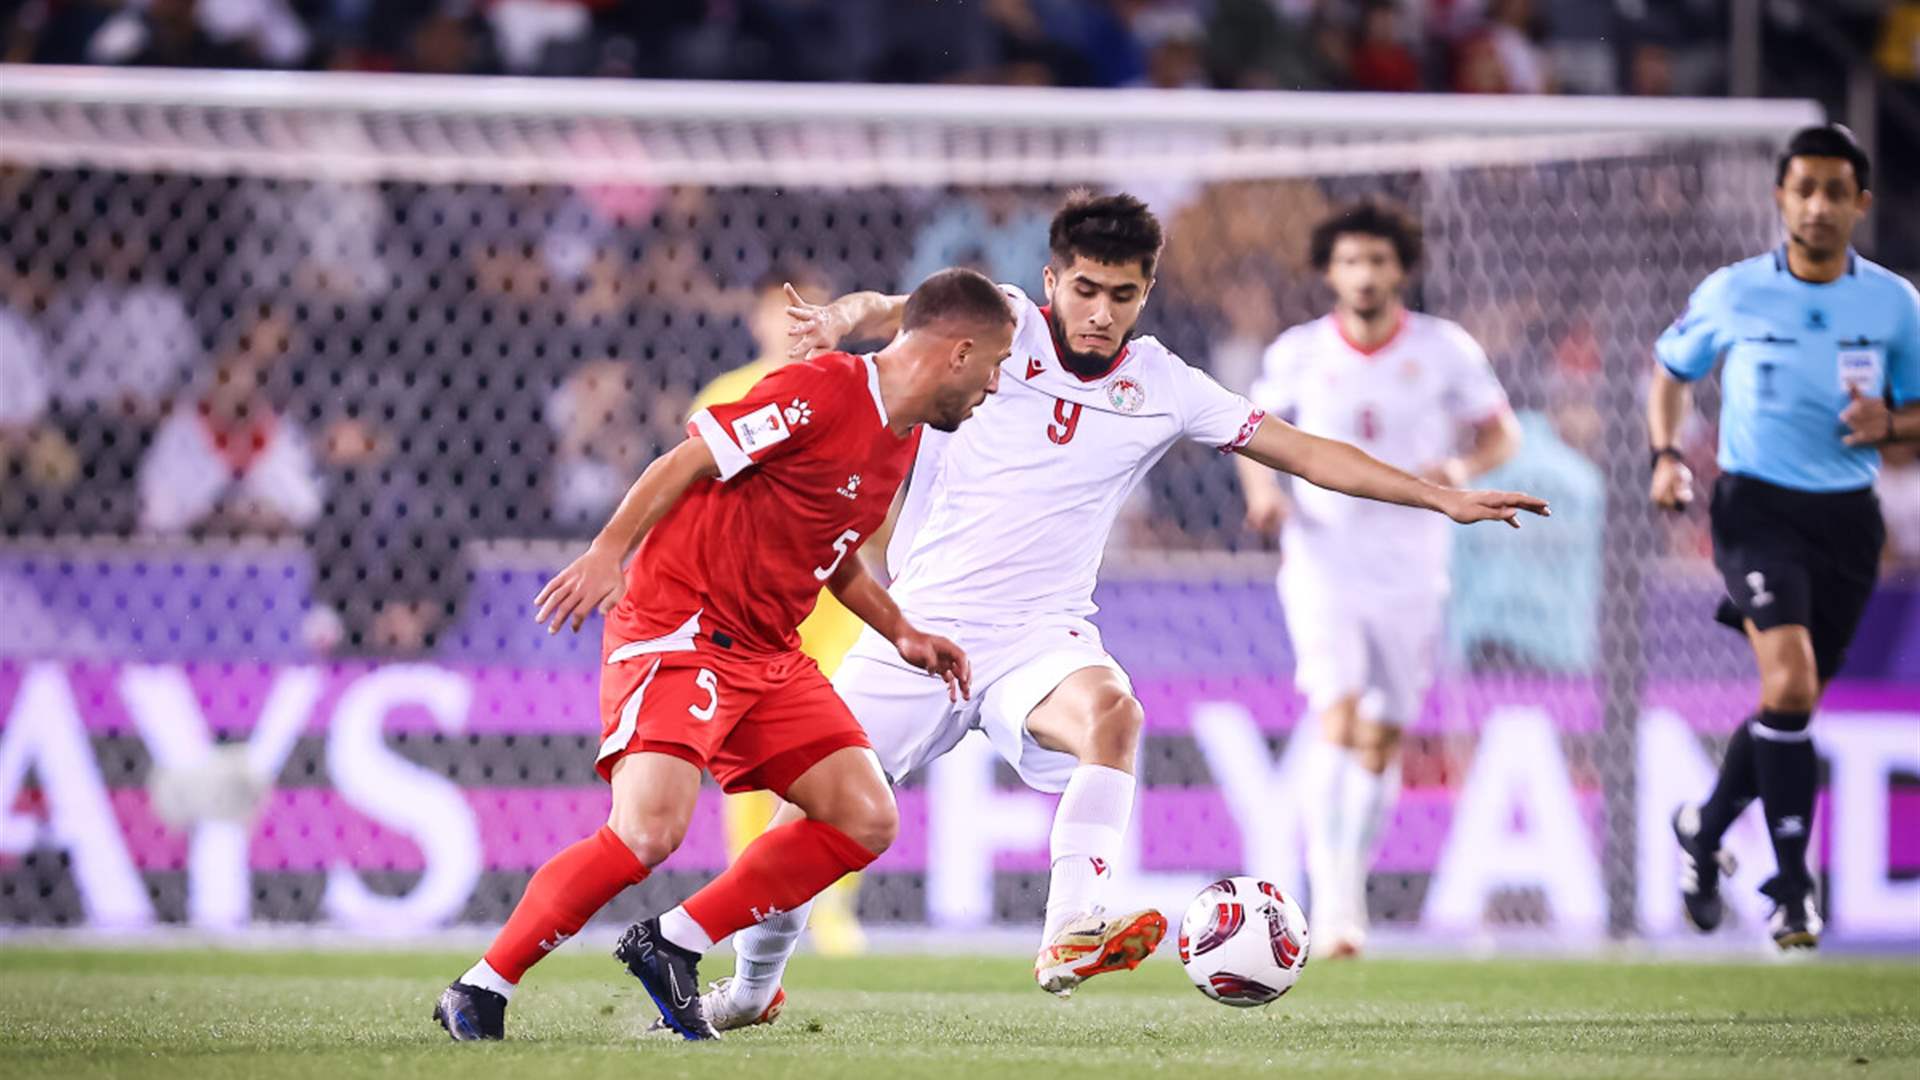 Lebanon exits the Asian Cup after losing to Tajikistan 2-1